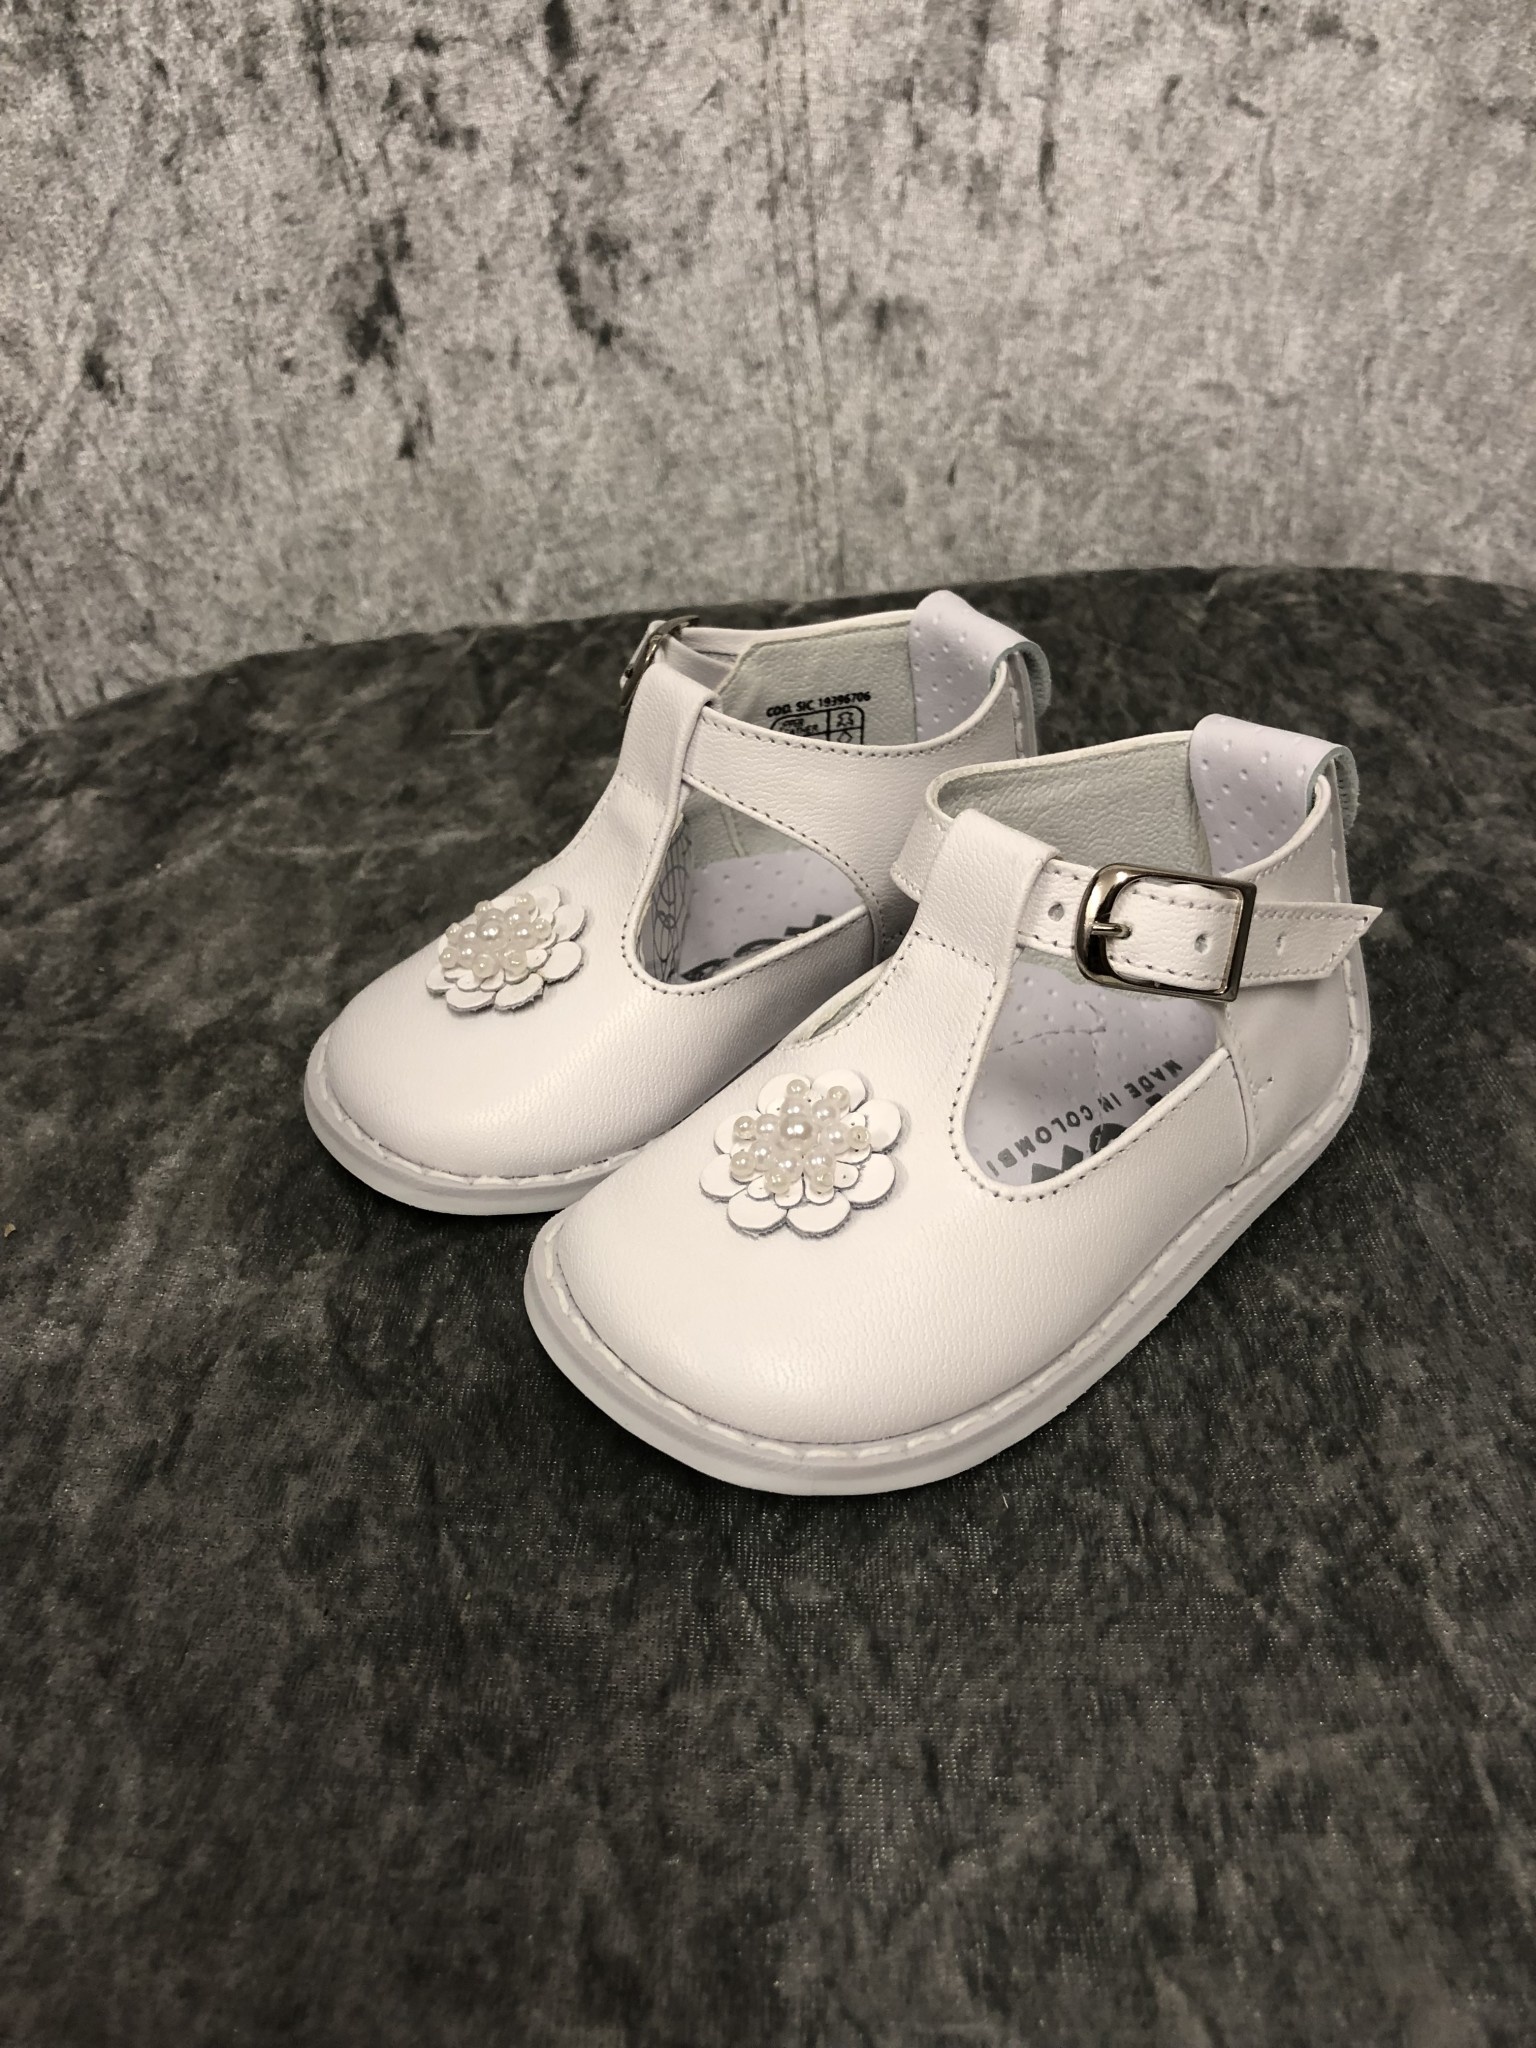 pex baby girl shoes